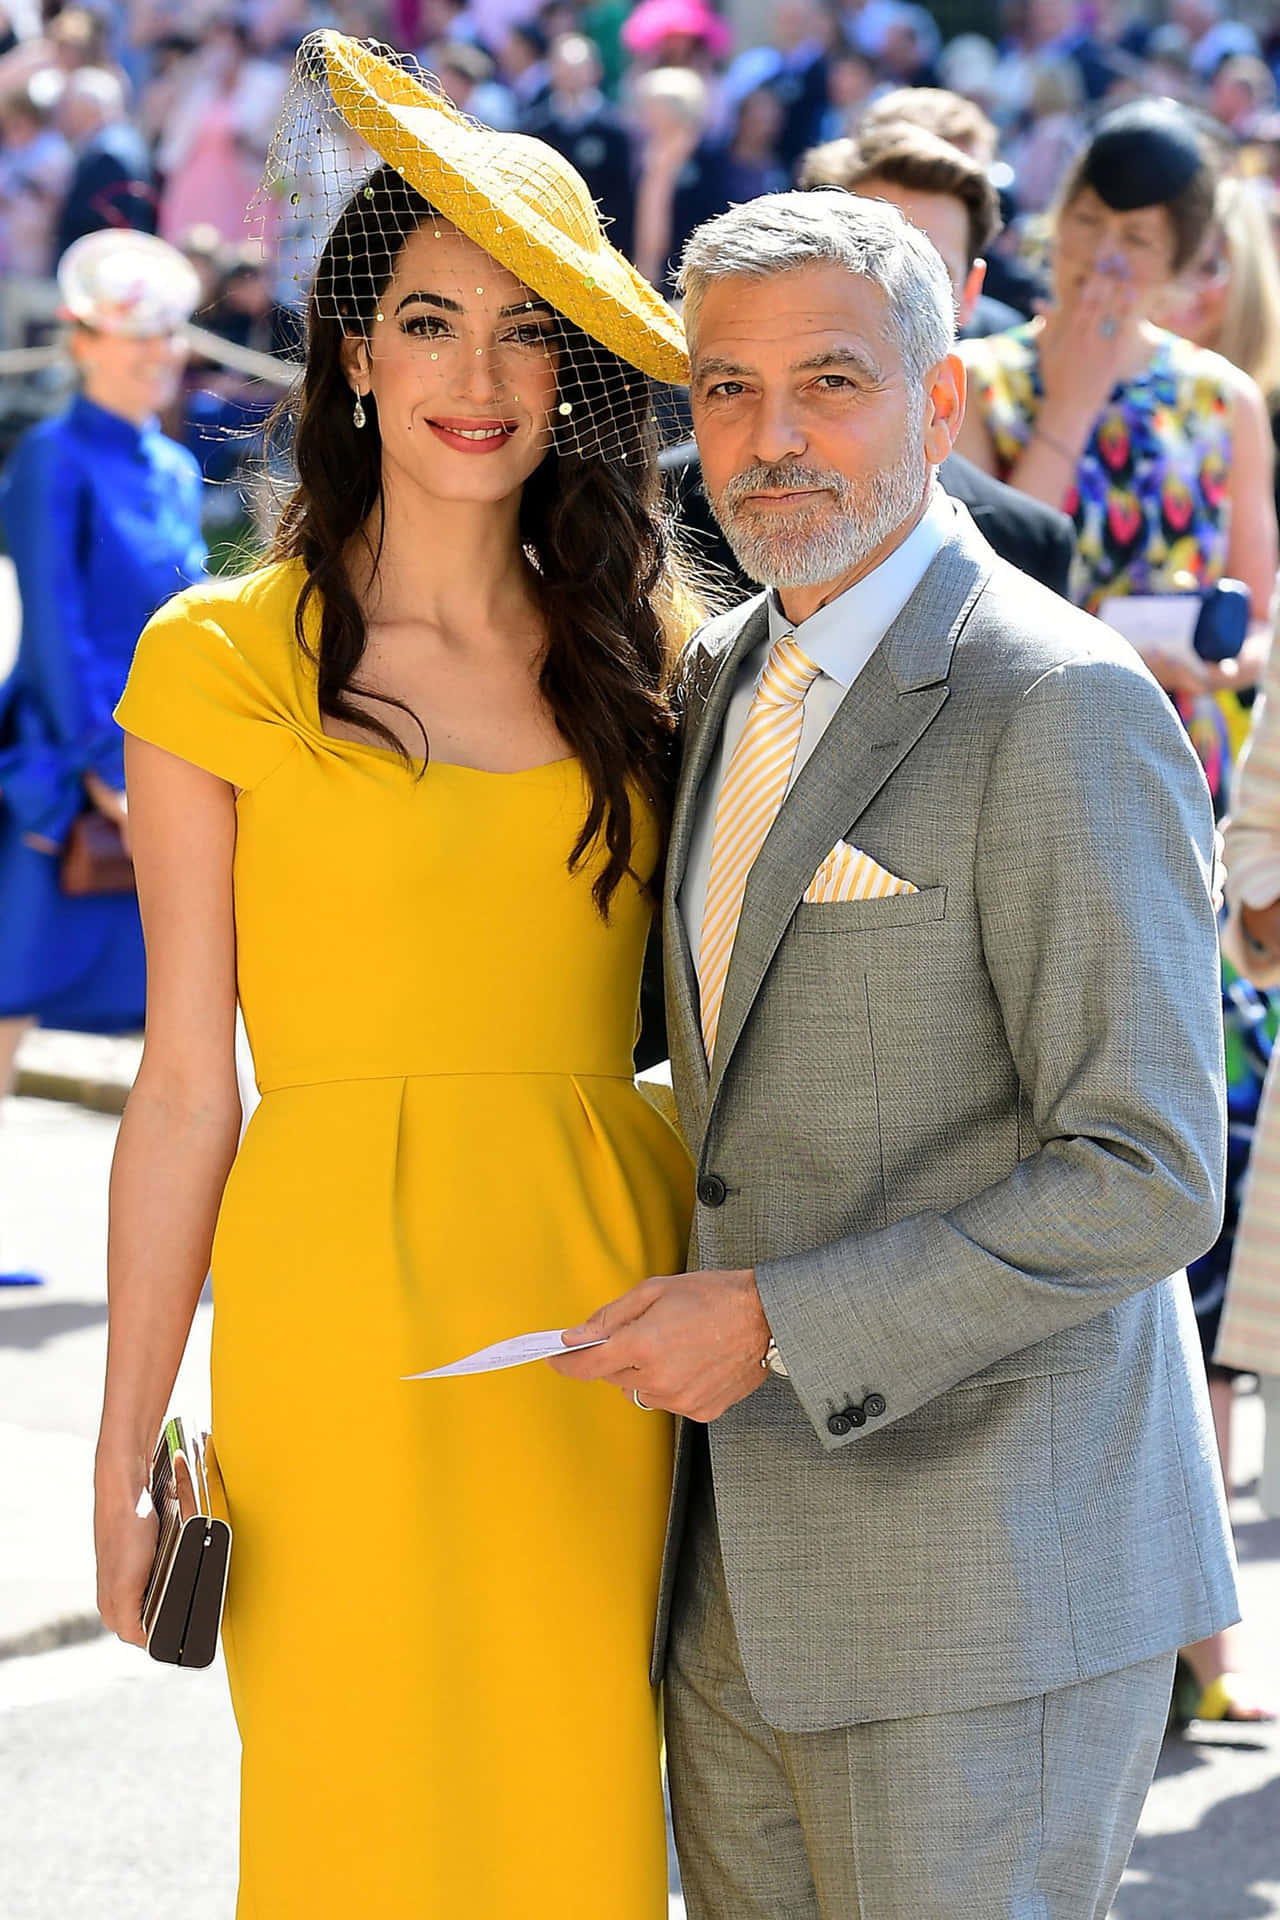 Couple George Clooney And Amal Clooney